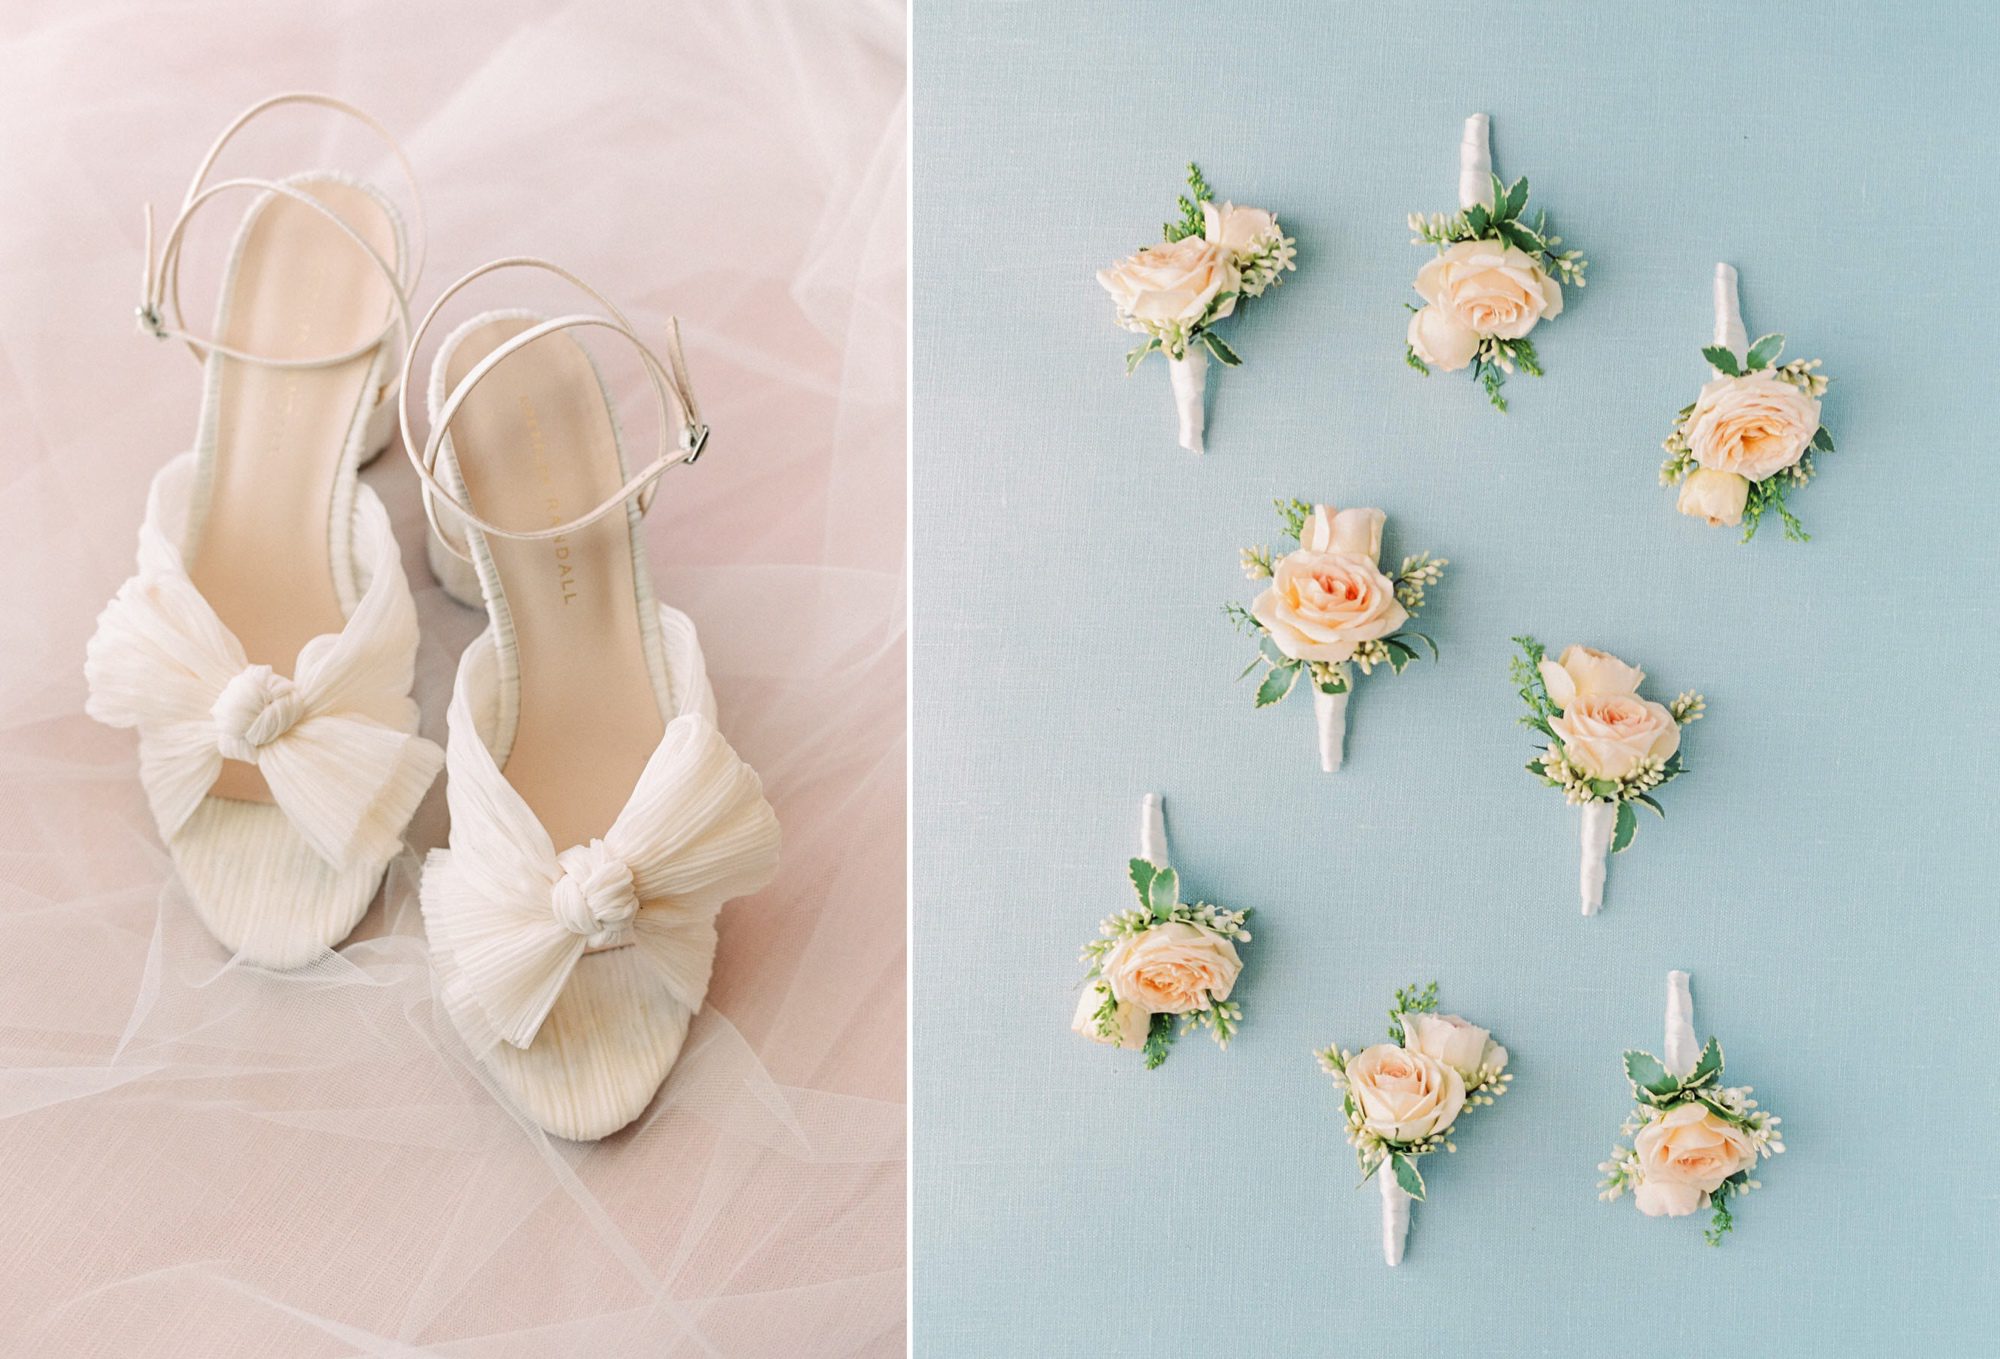 bridal shoes and boutonnieres by Elegant Details with Elyse Events at the White Barn Edna Valley photographed by san luis obispo wedding photographers jessica sofranko